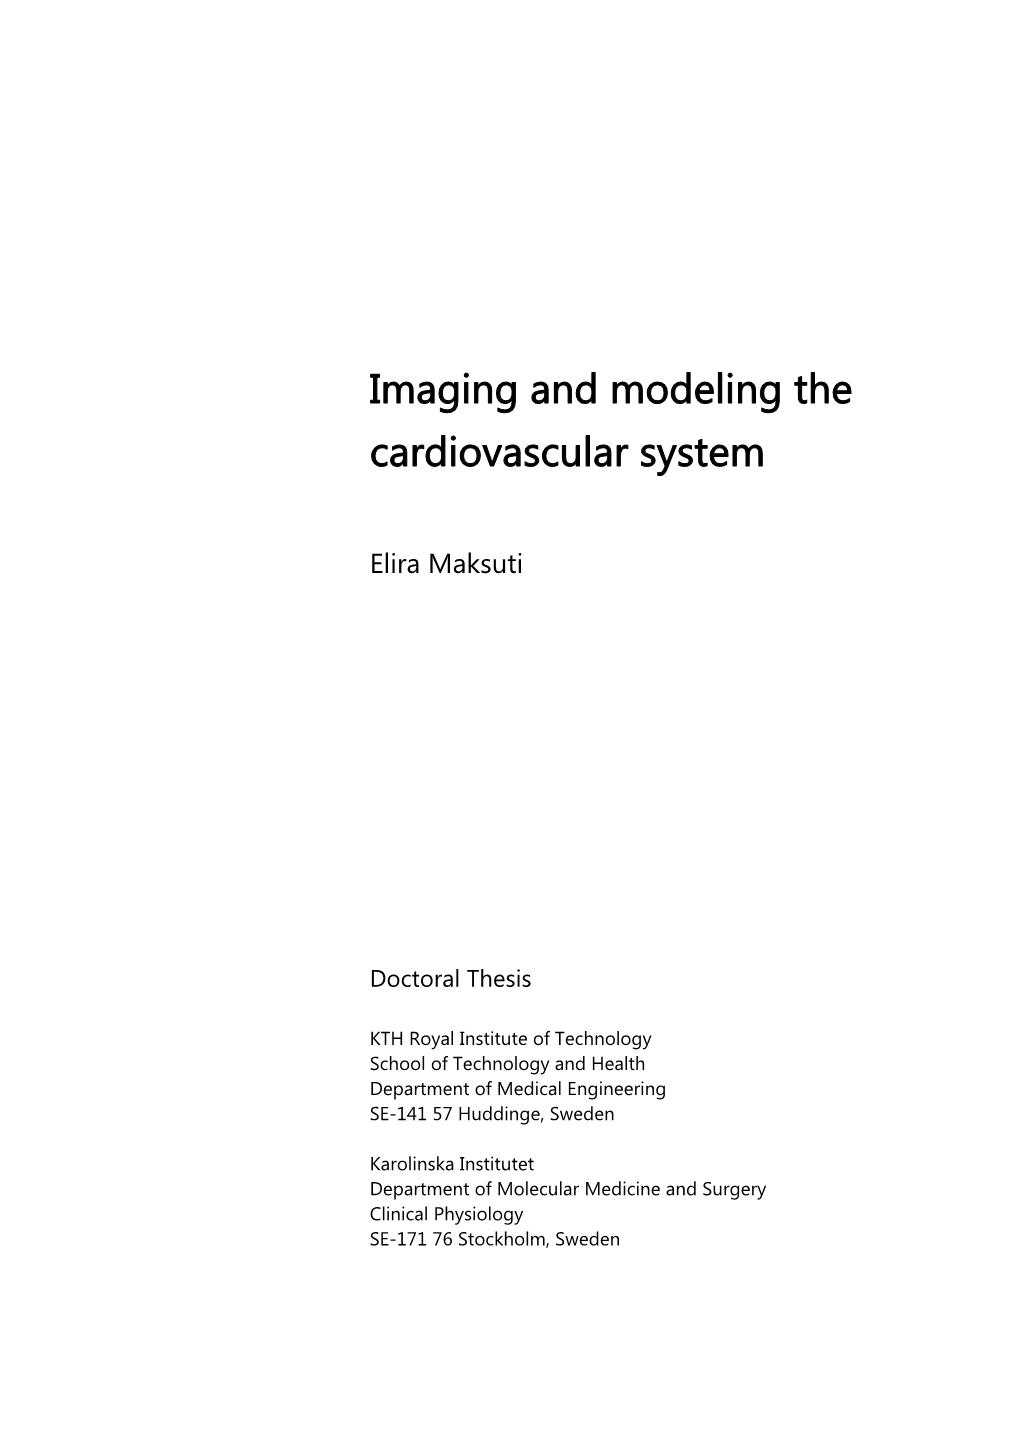 Imaging and Modeling the Cardiovascular System